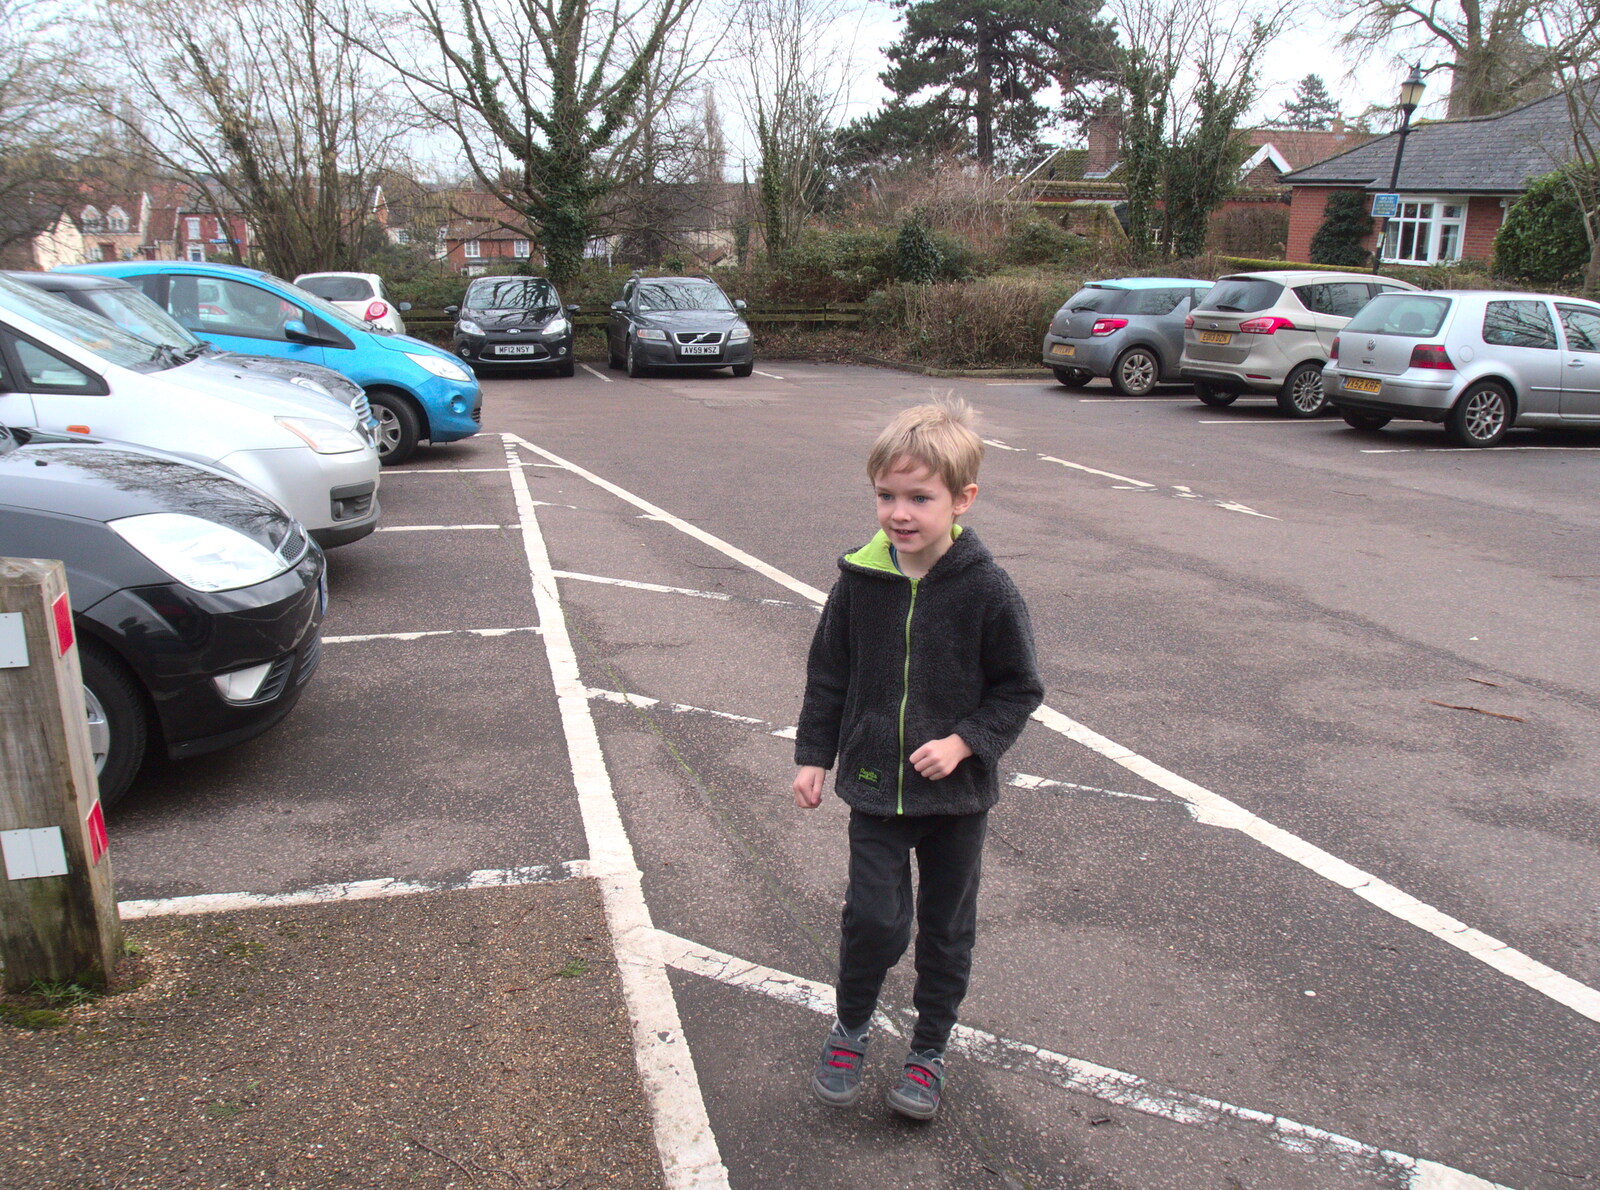 Harry in Shelfanger Road car park in Diss from Paddington Fire Alarms and Mere Moments Café, Diss, Norfolk - 2nd February 2018